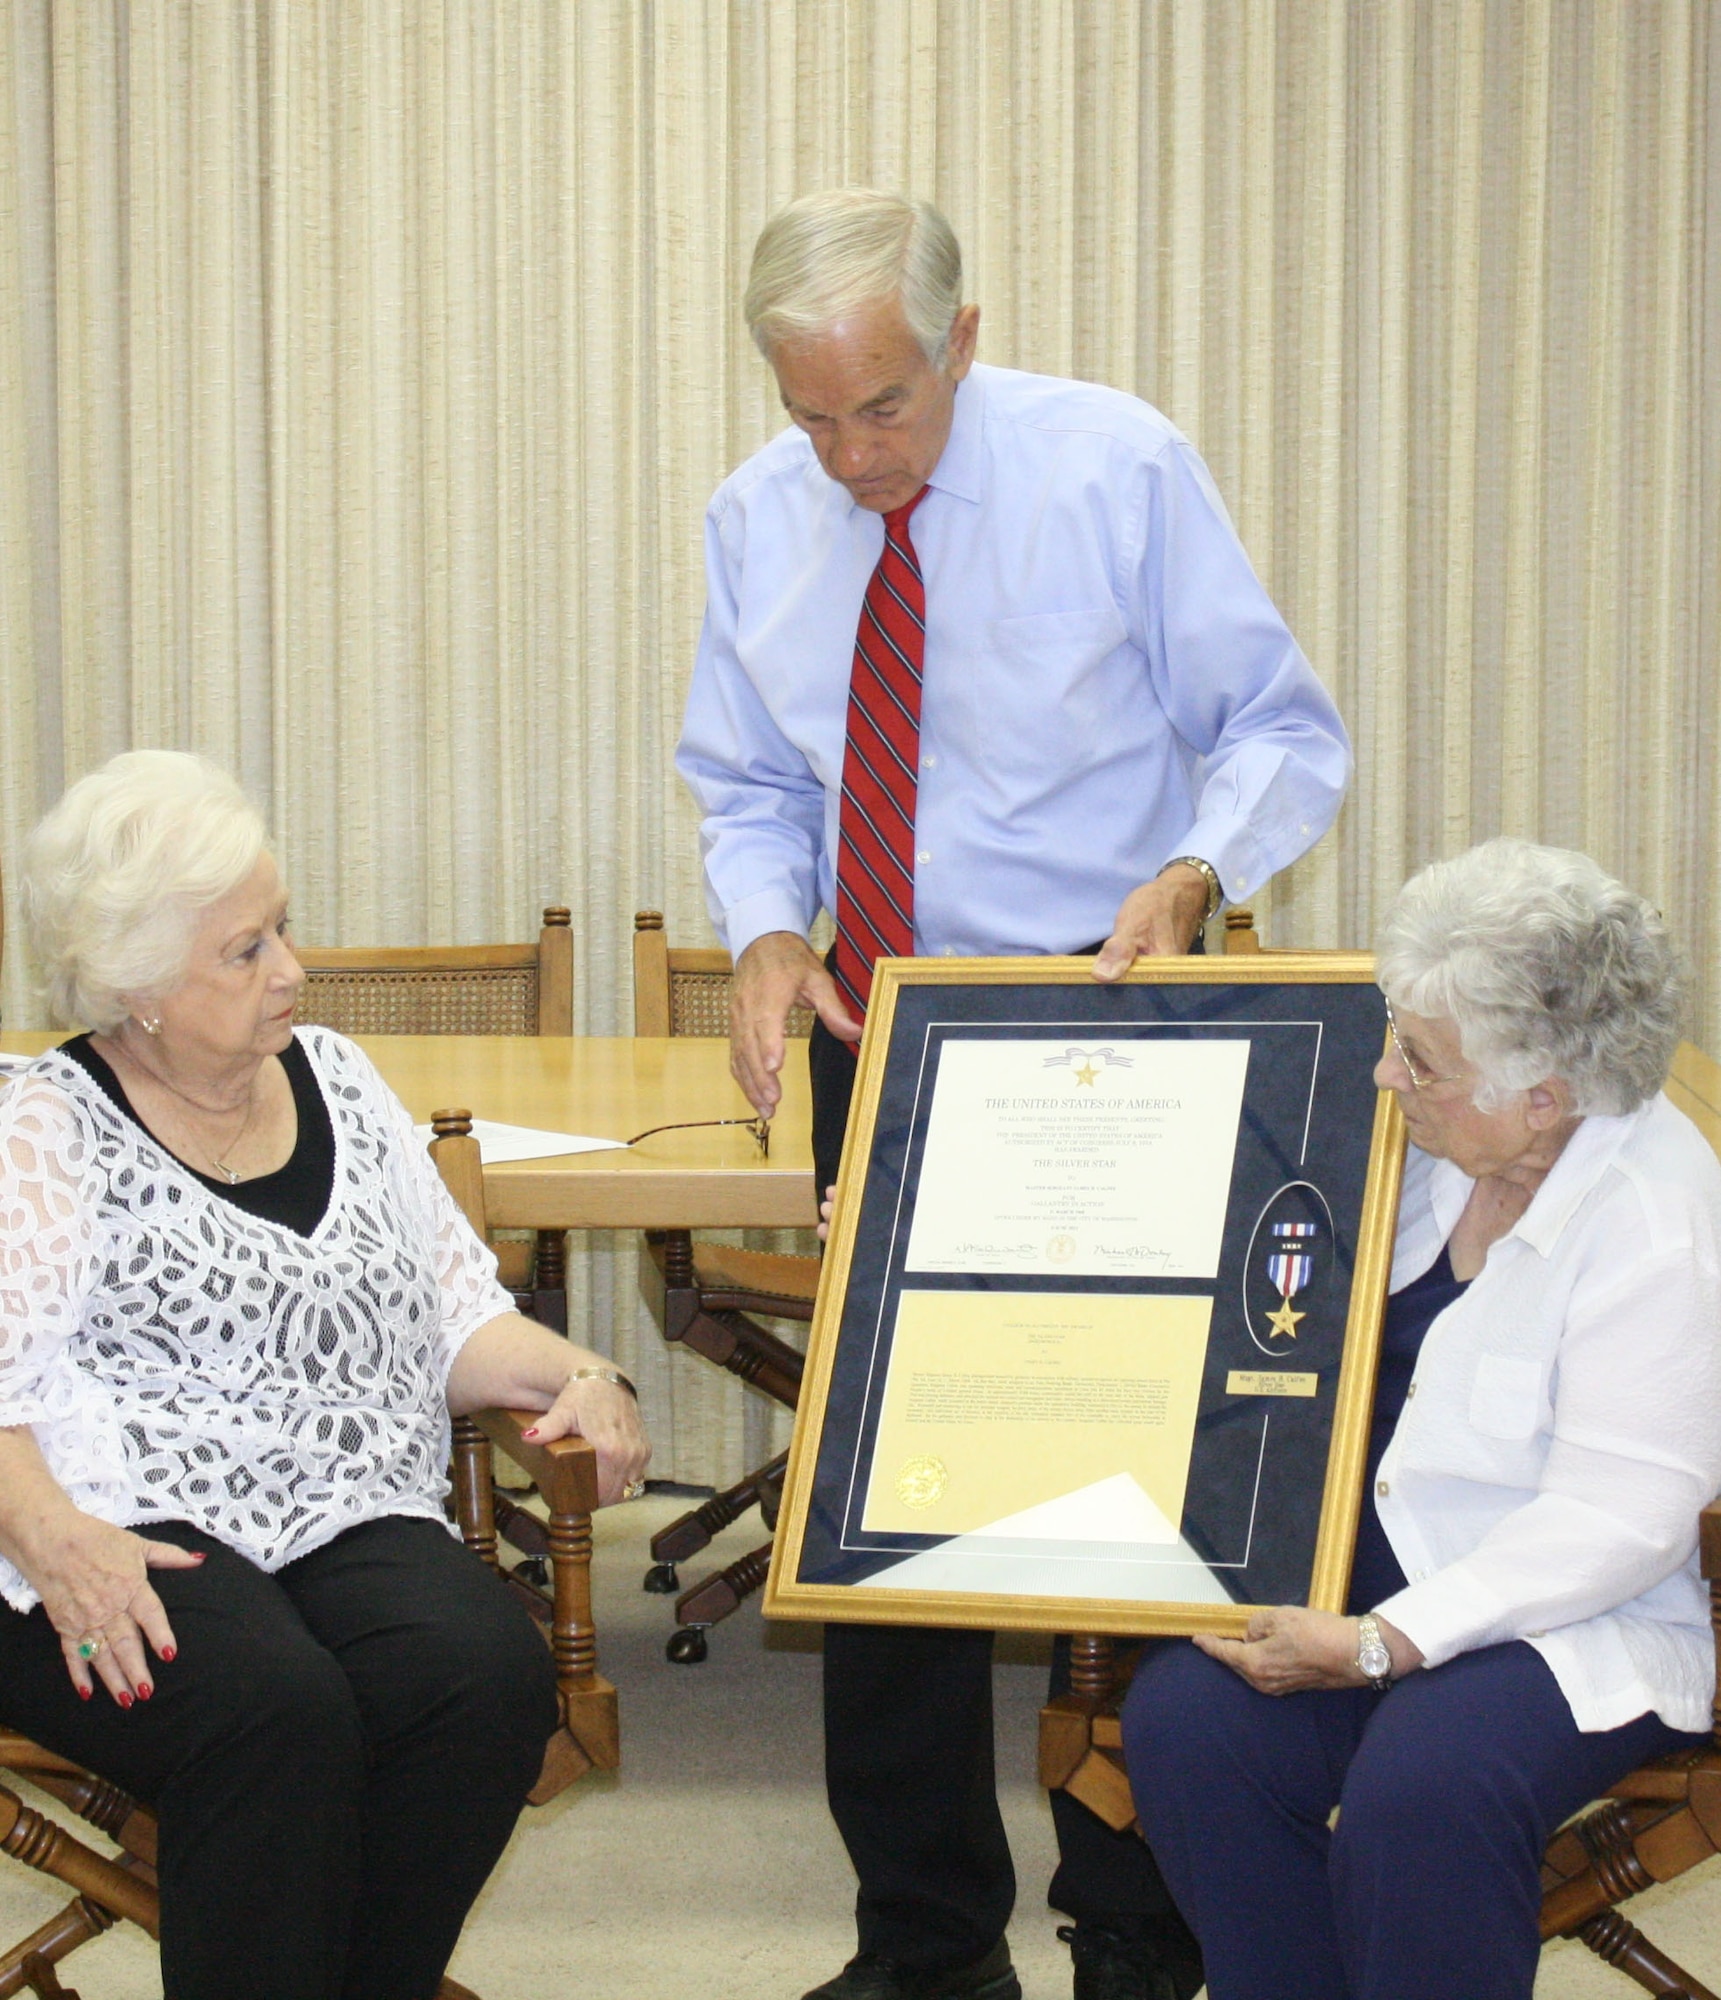 Rep. Ron Paul, center, presents a Silver Star medal and citation to Rosalie Bacica, left, and Frances Arrington at a ceremony in Lake Jackson, Texas, Aug. 16, 2012. Bacica and Arrington accepted the posthumous award on behalf of their brother, Master Sgt. James Calfee, who was killed March 11, 1968, when the North Vietnamese Army attacked Lima Site 85, a top secret Air Force radar site in Laos. (Photo courtesy of Rep. Ron Paul)